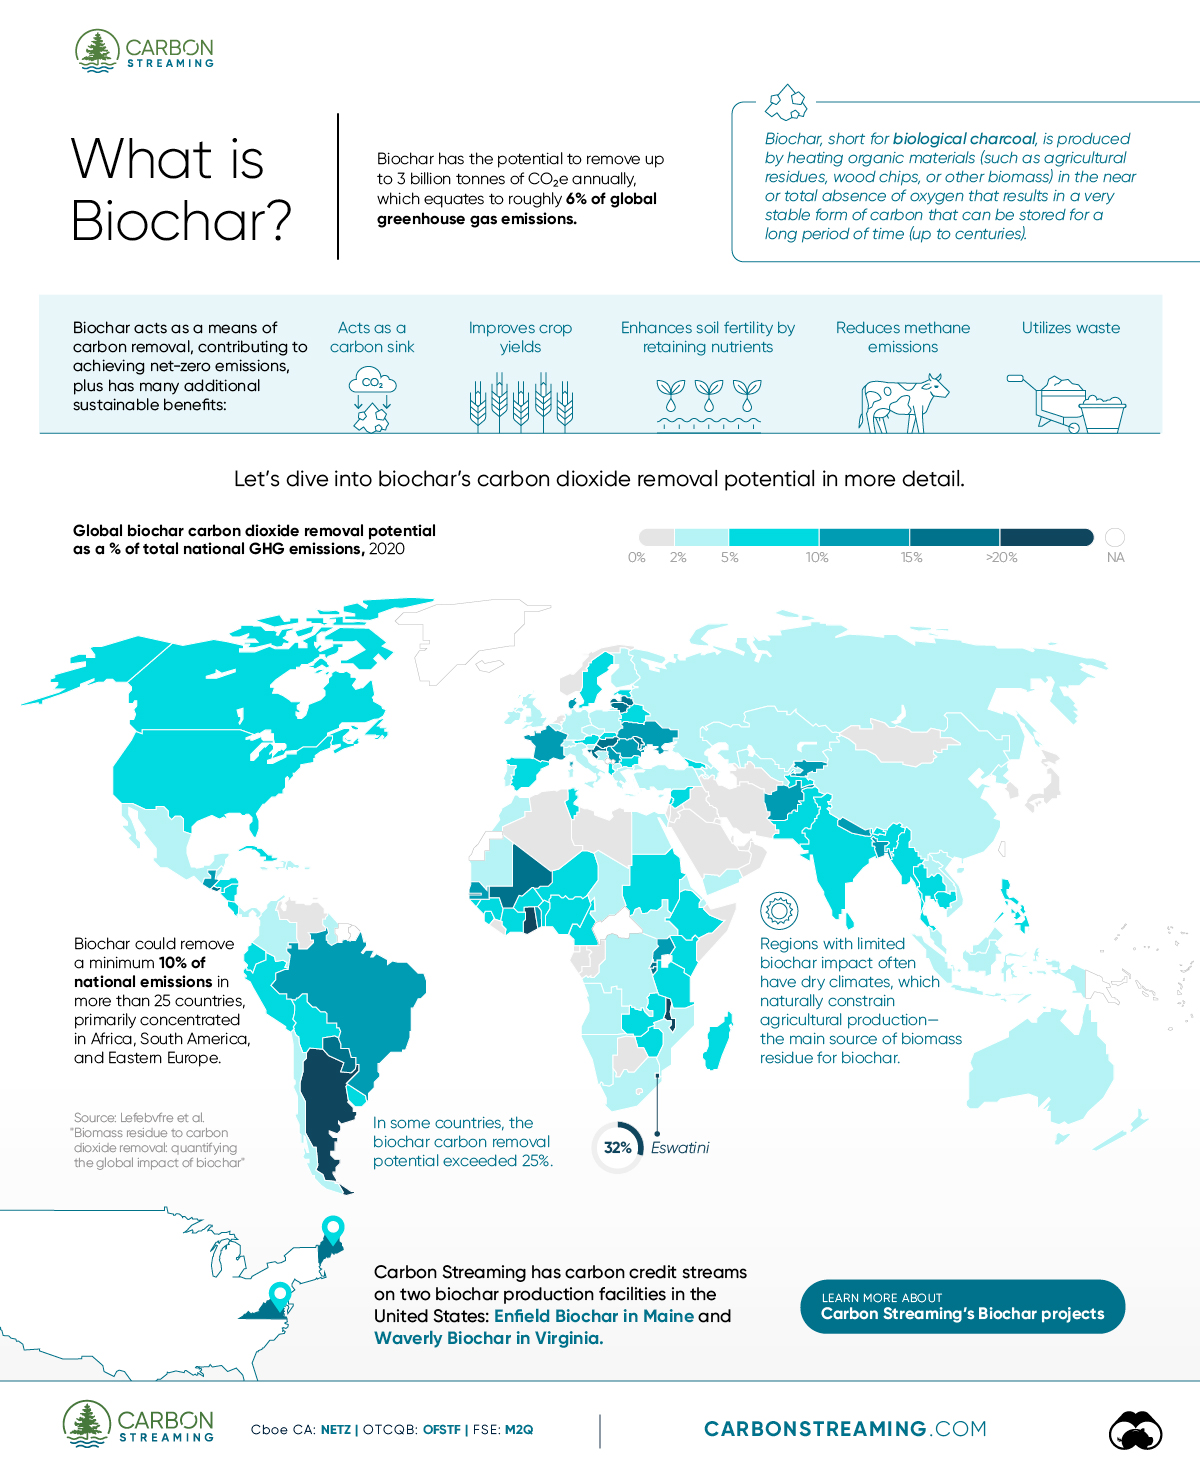 carbon_streaming_biochar_infographic